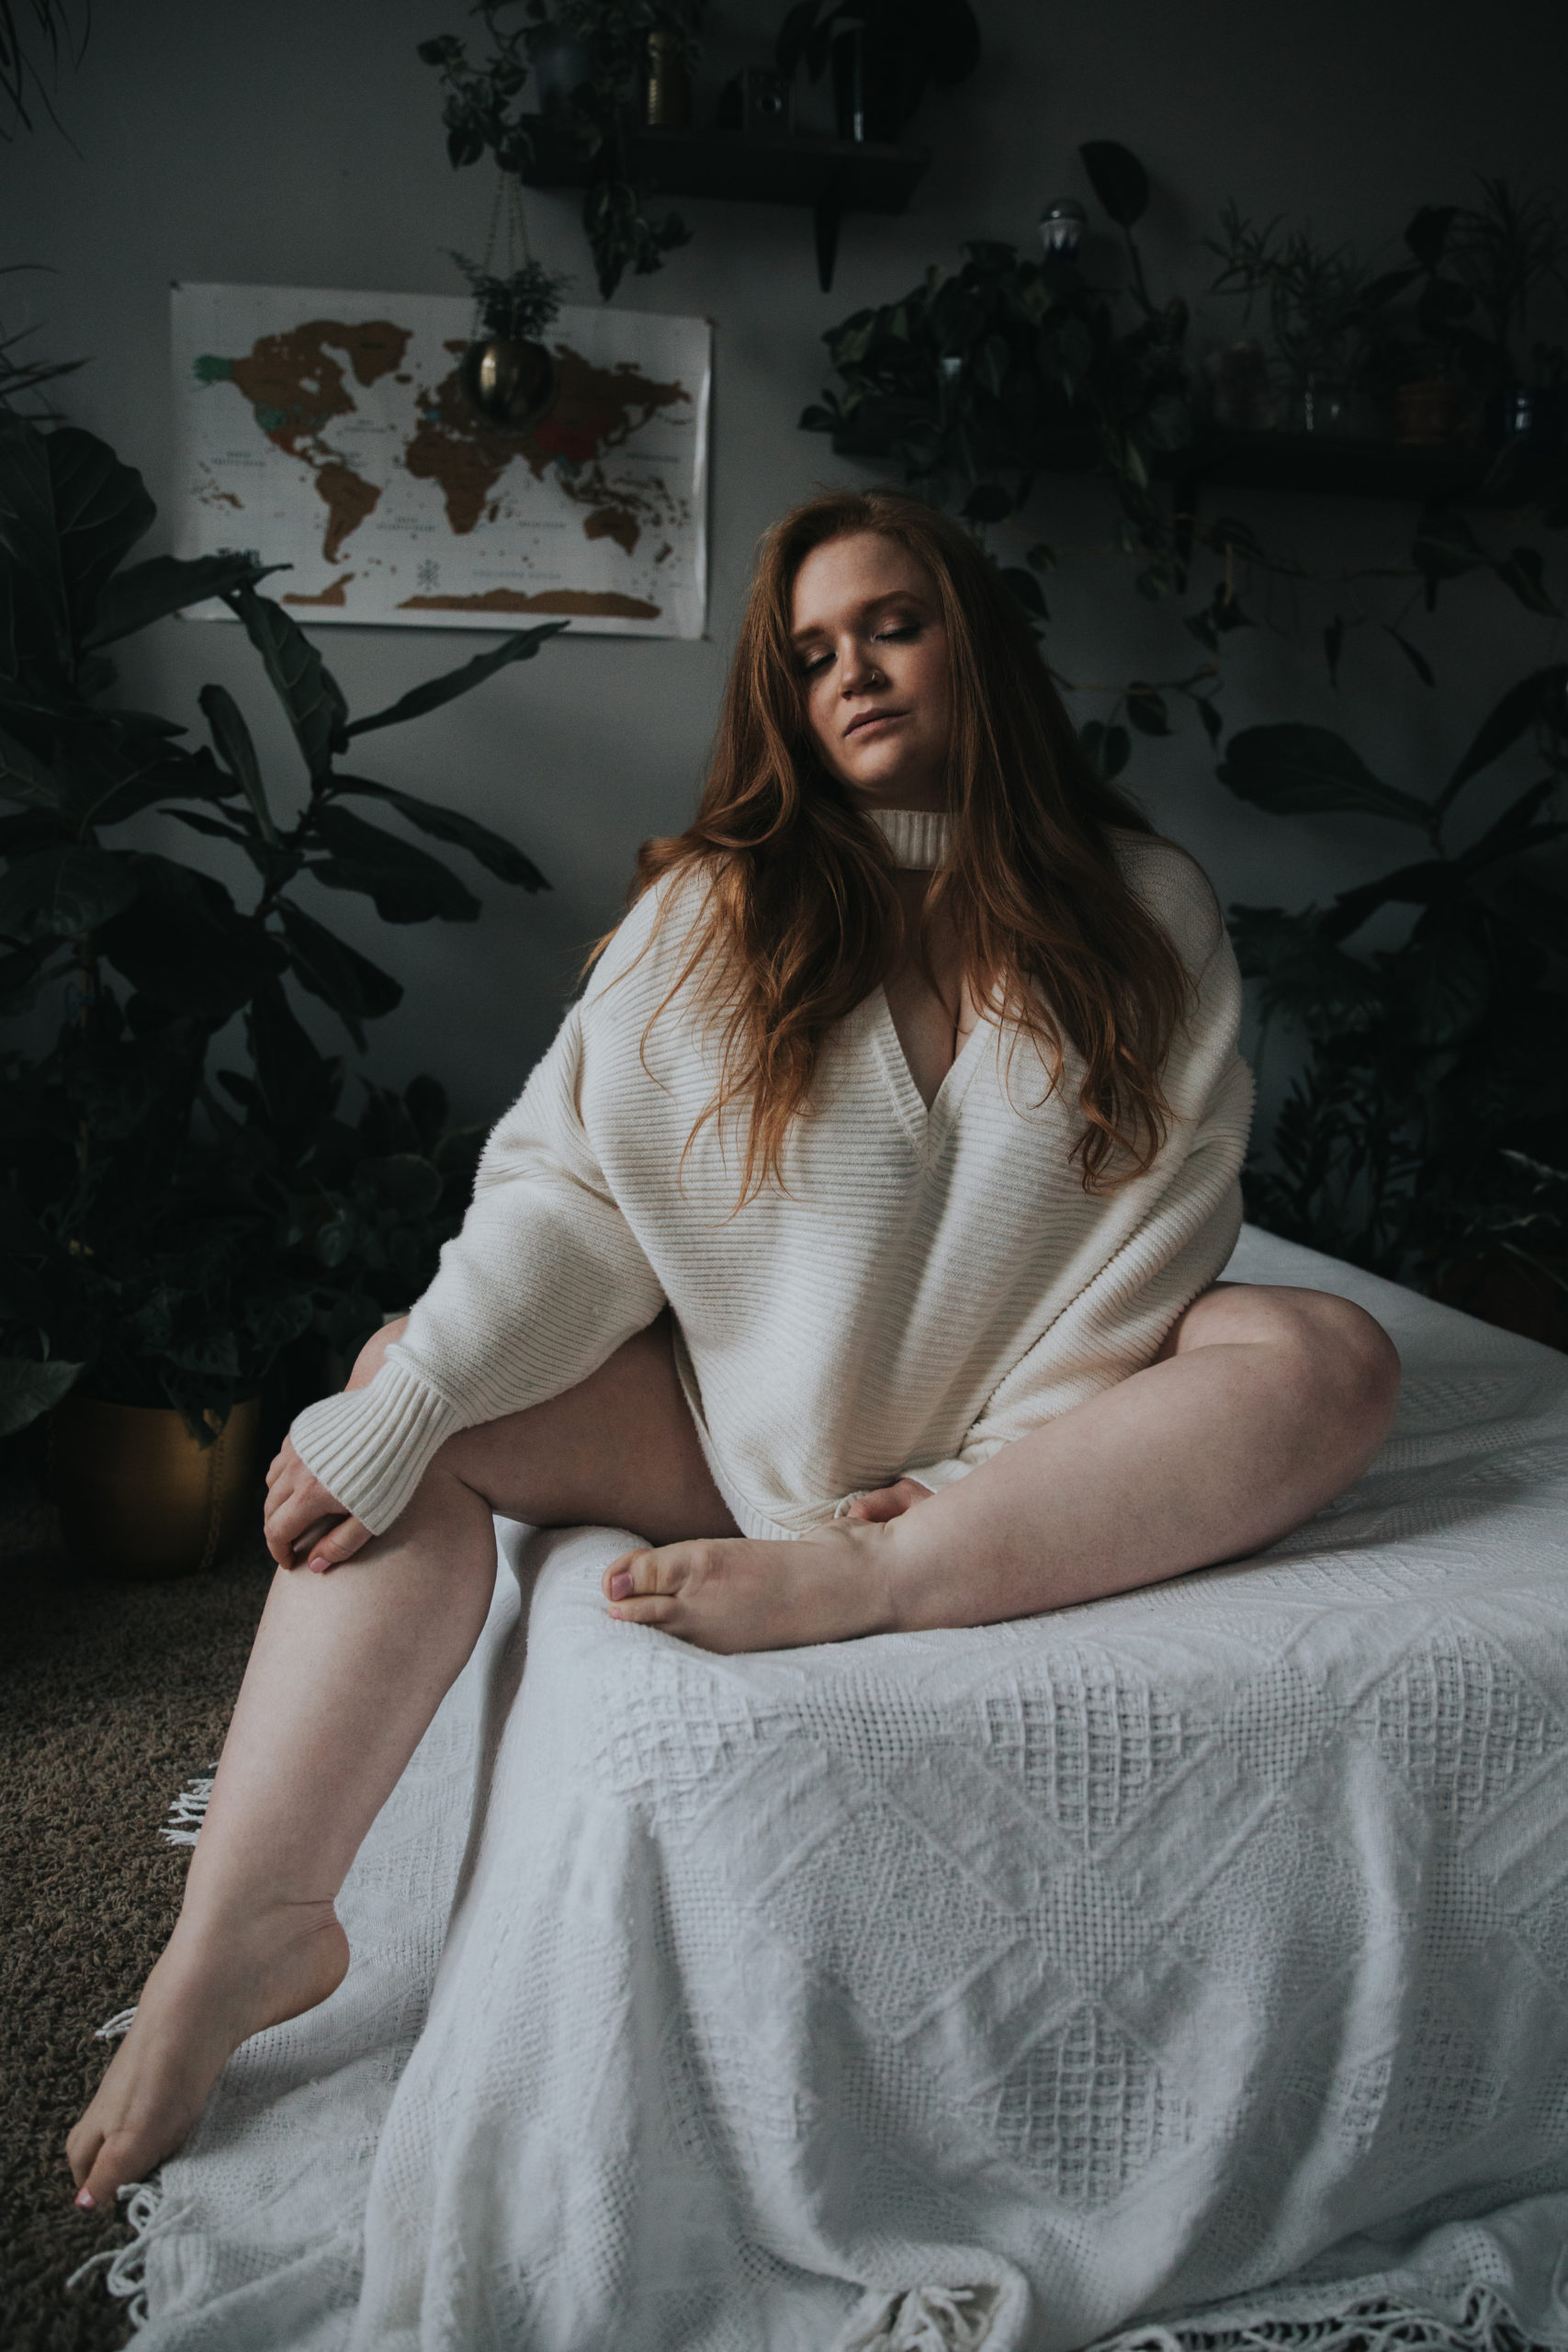 Red head woman wearing a white sweater for moody boudoir photos